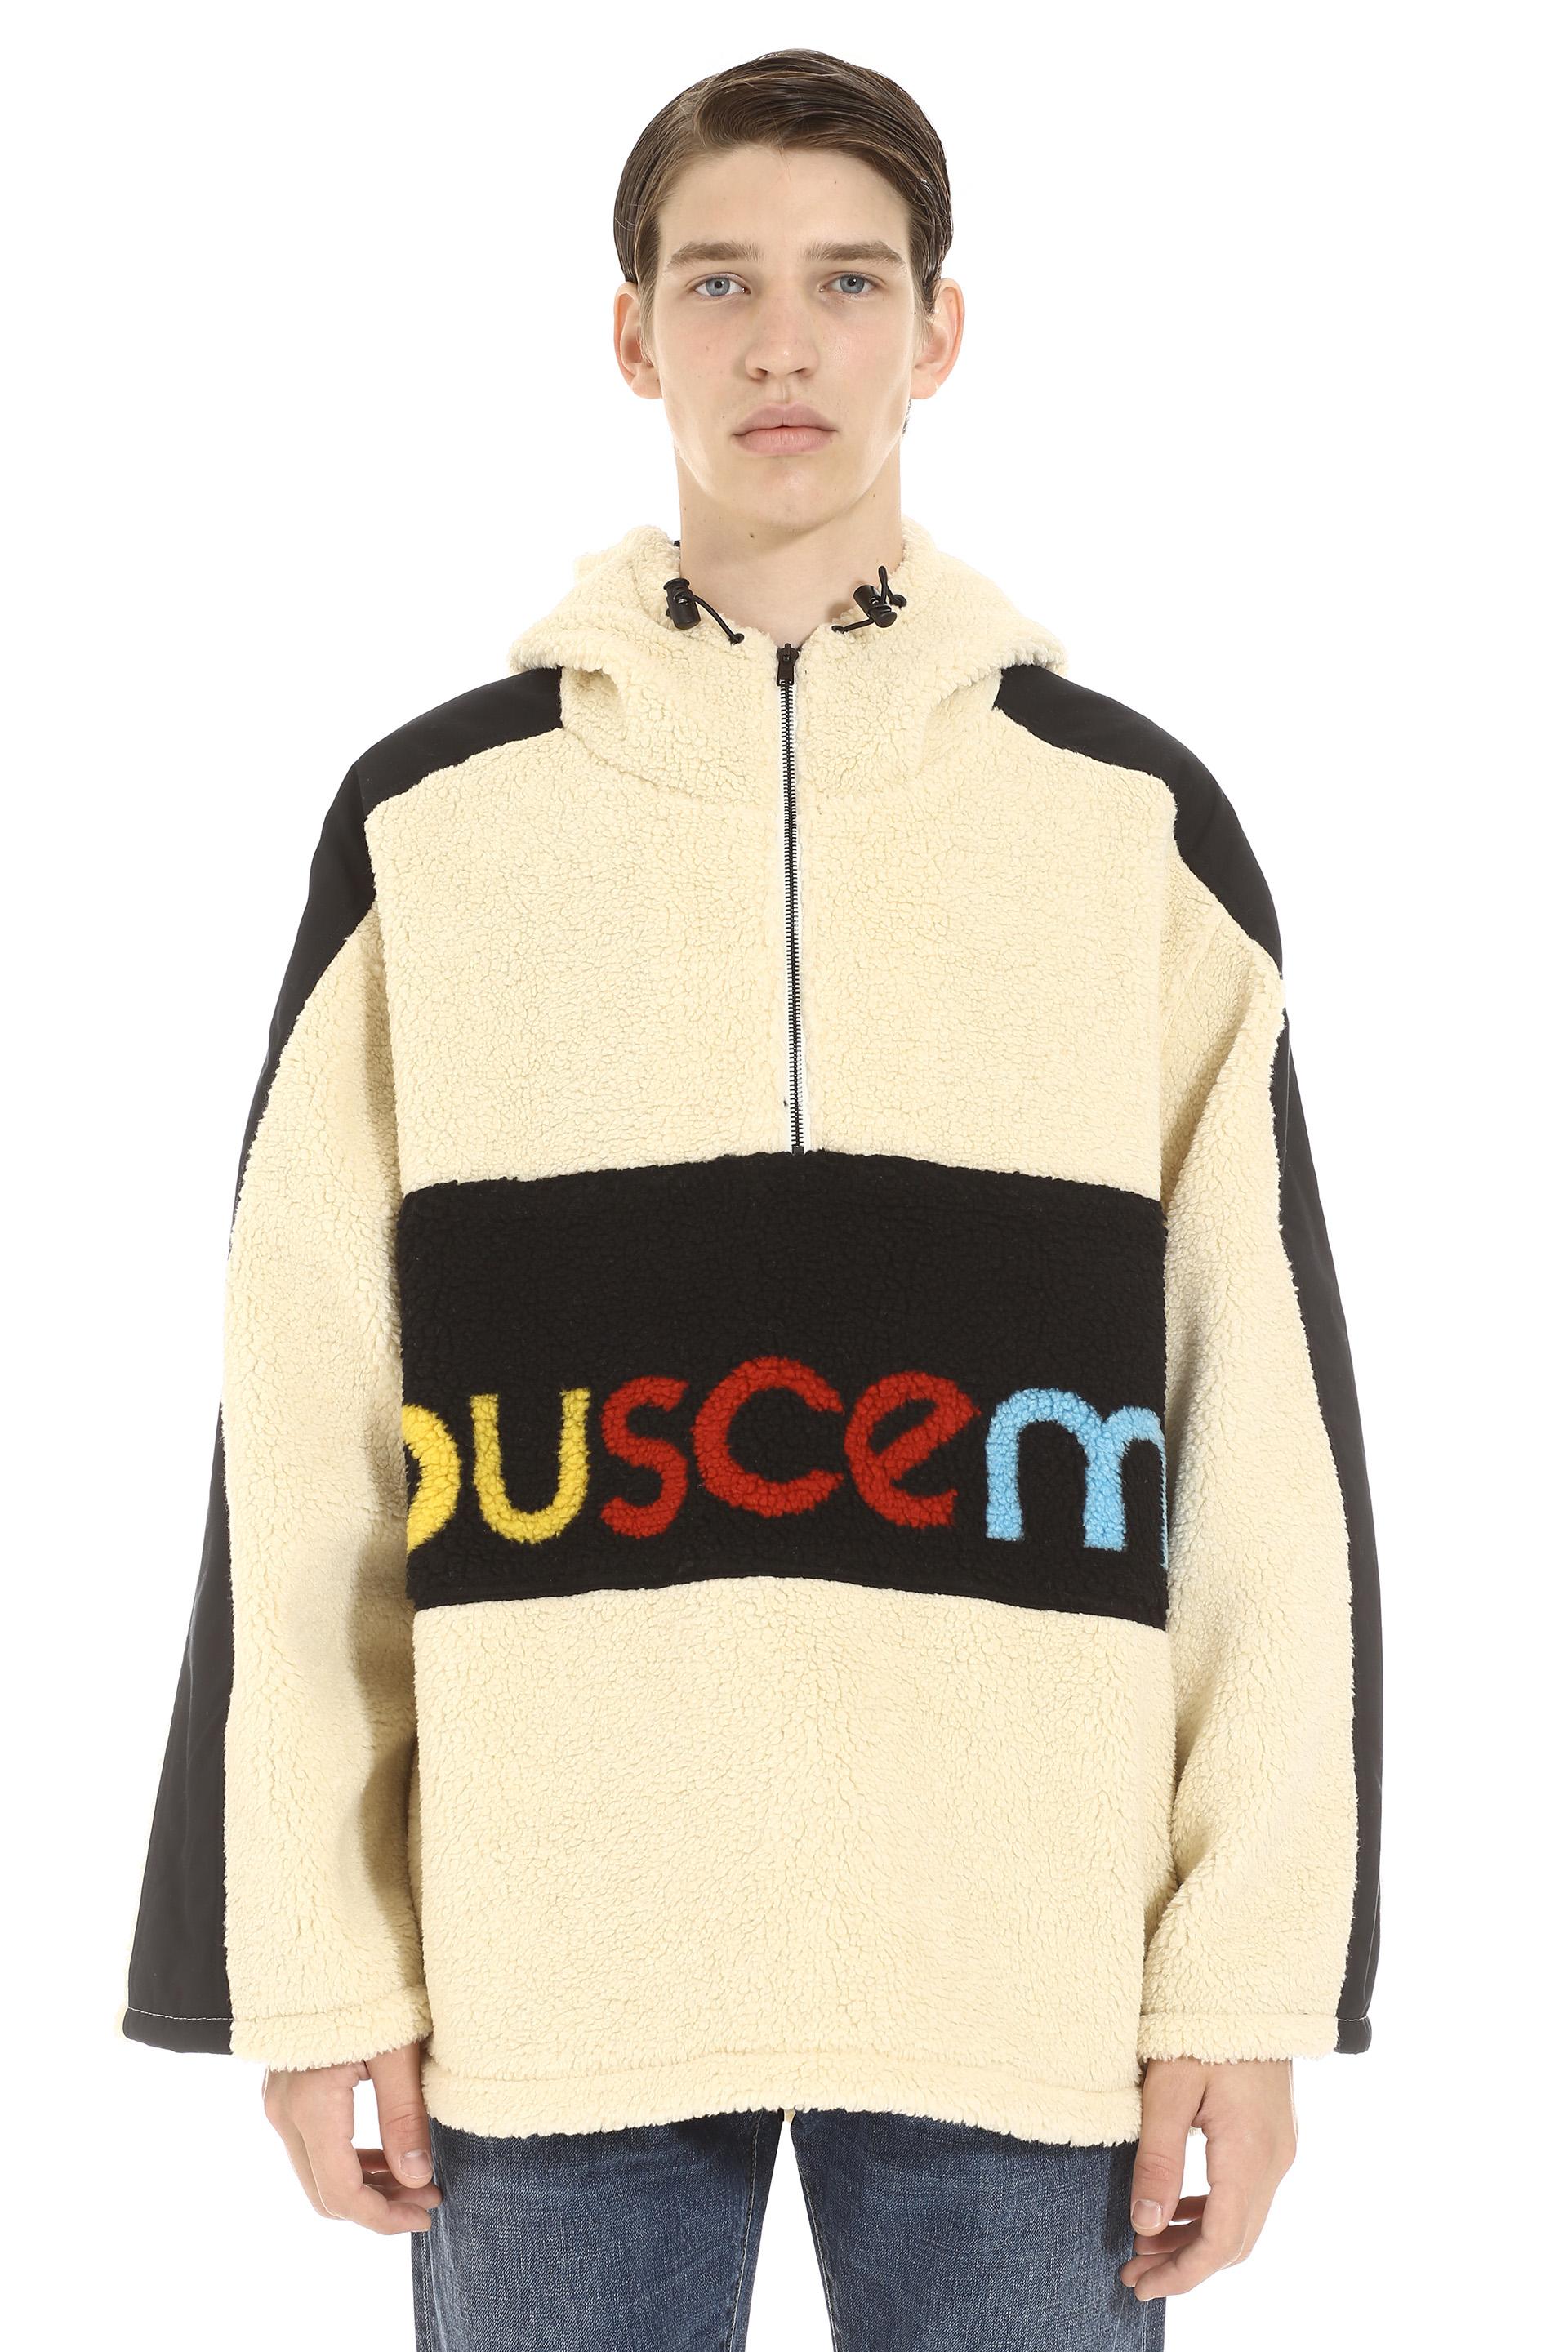 Buscemi Synthetic Logo Printed Shearling Sweatshirt in Ivory (White ...